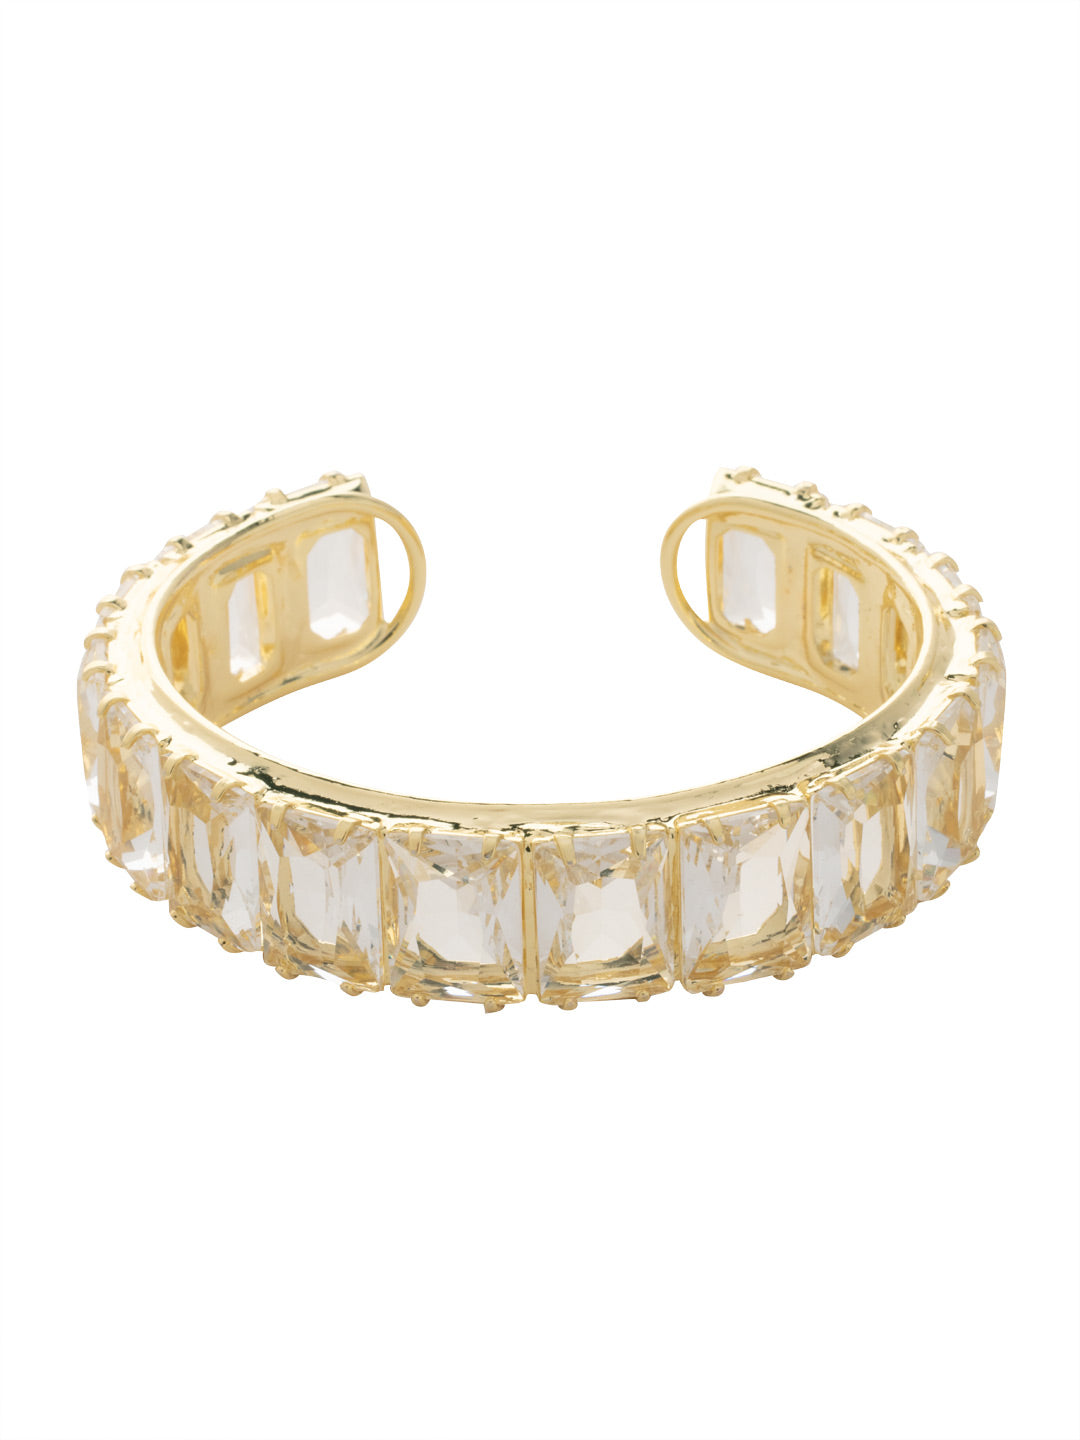 Julianna Emerald Cut Cuff Bracelet - BFD78BGCRY - <p>The Julianna Emerald Cut Cuff Bracelet features a row of rectangle cut candy drop crystals around an adjustable cuff bracelet band. From Sorrelli's Crystal collection in our Bright Gold-tone finish.</p>